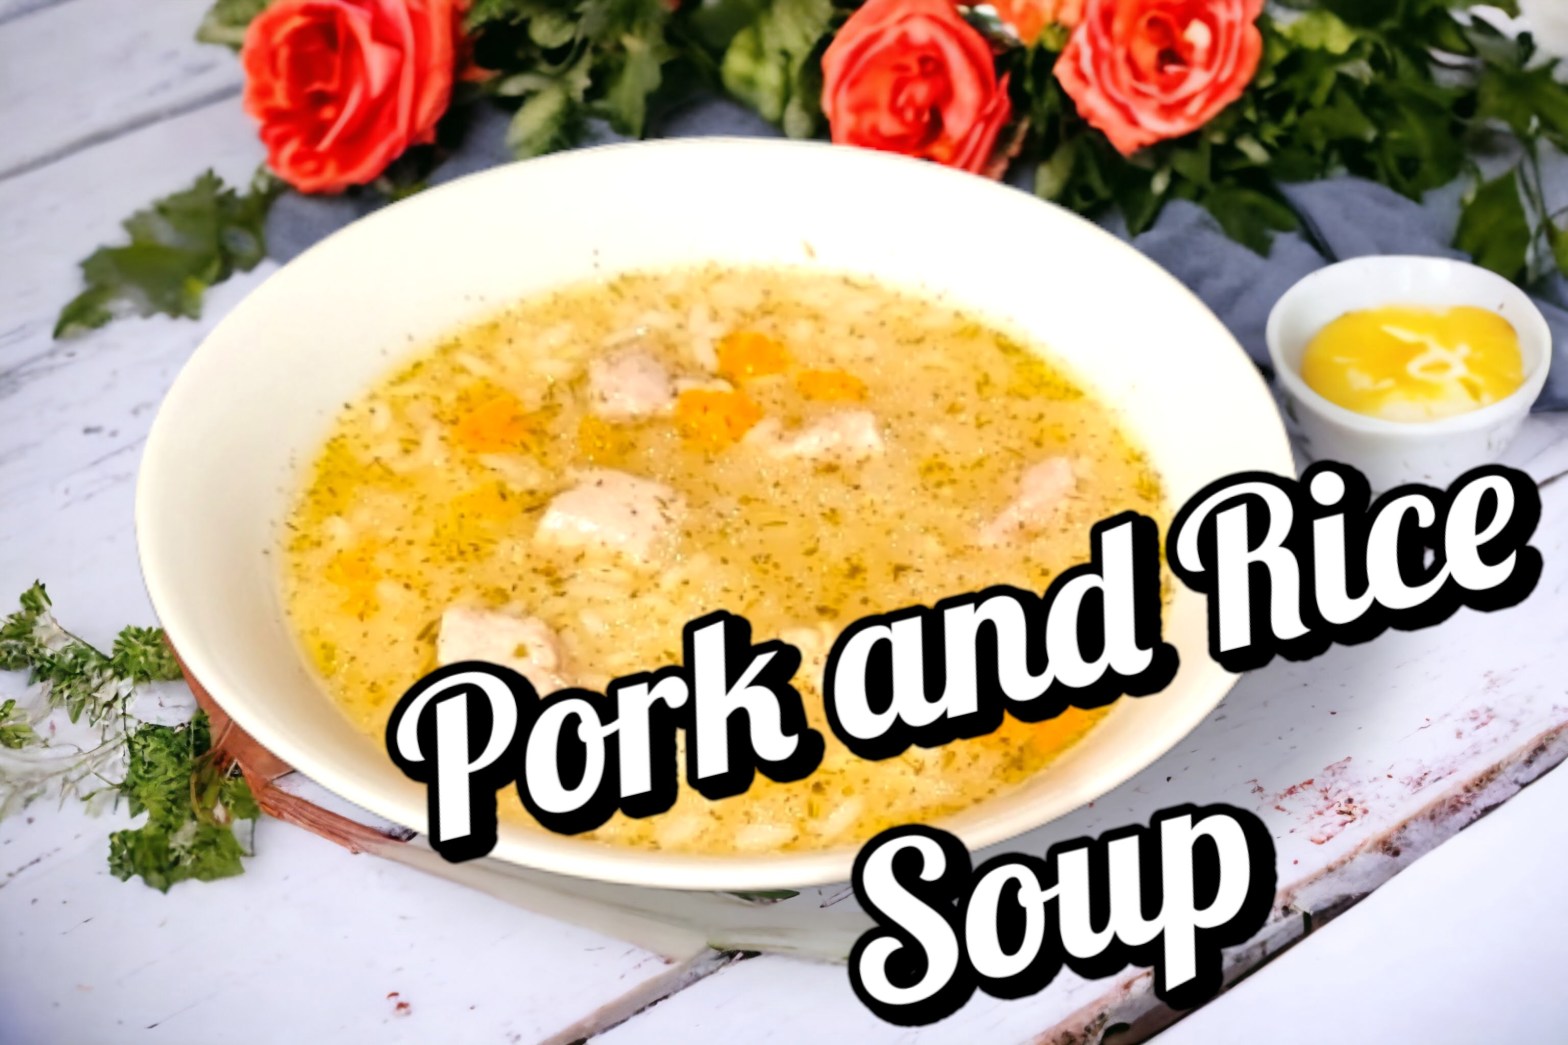 How to Make Pork and Rice Soup